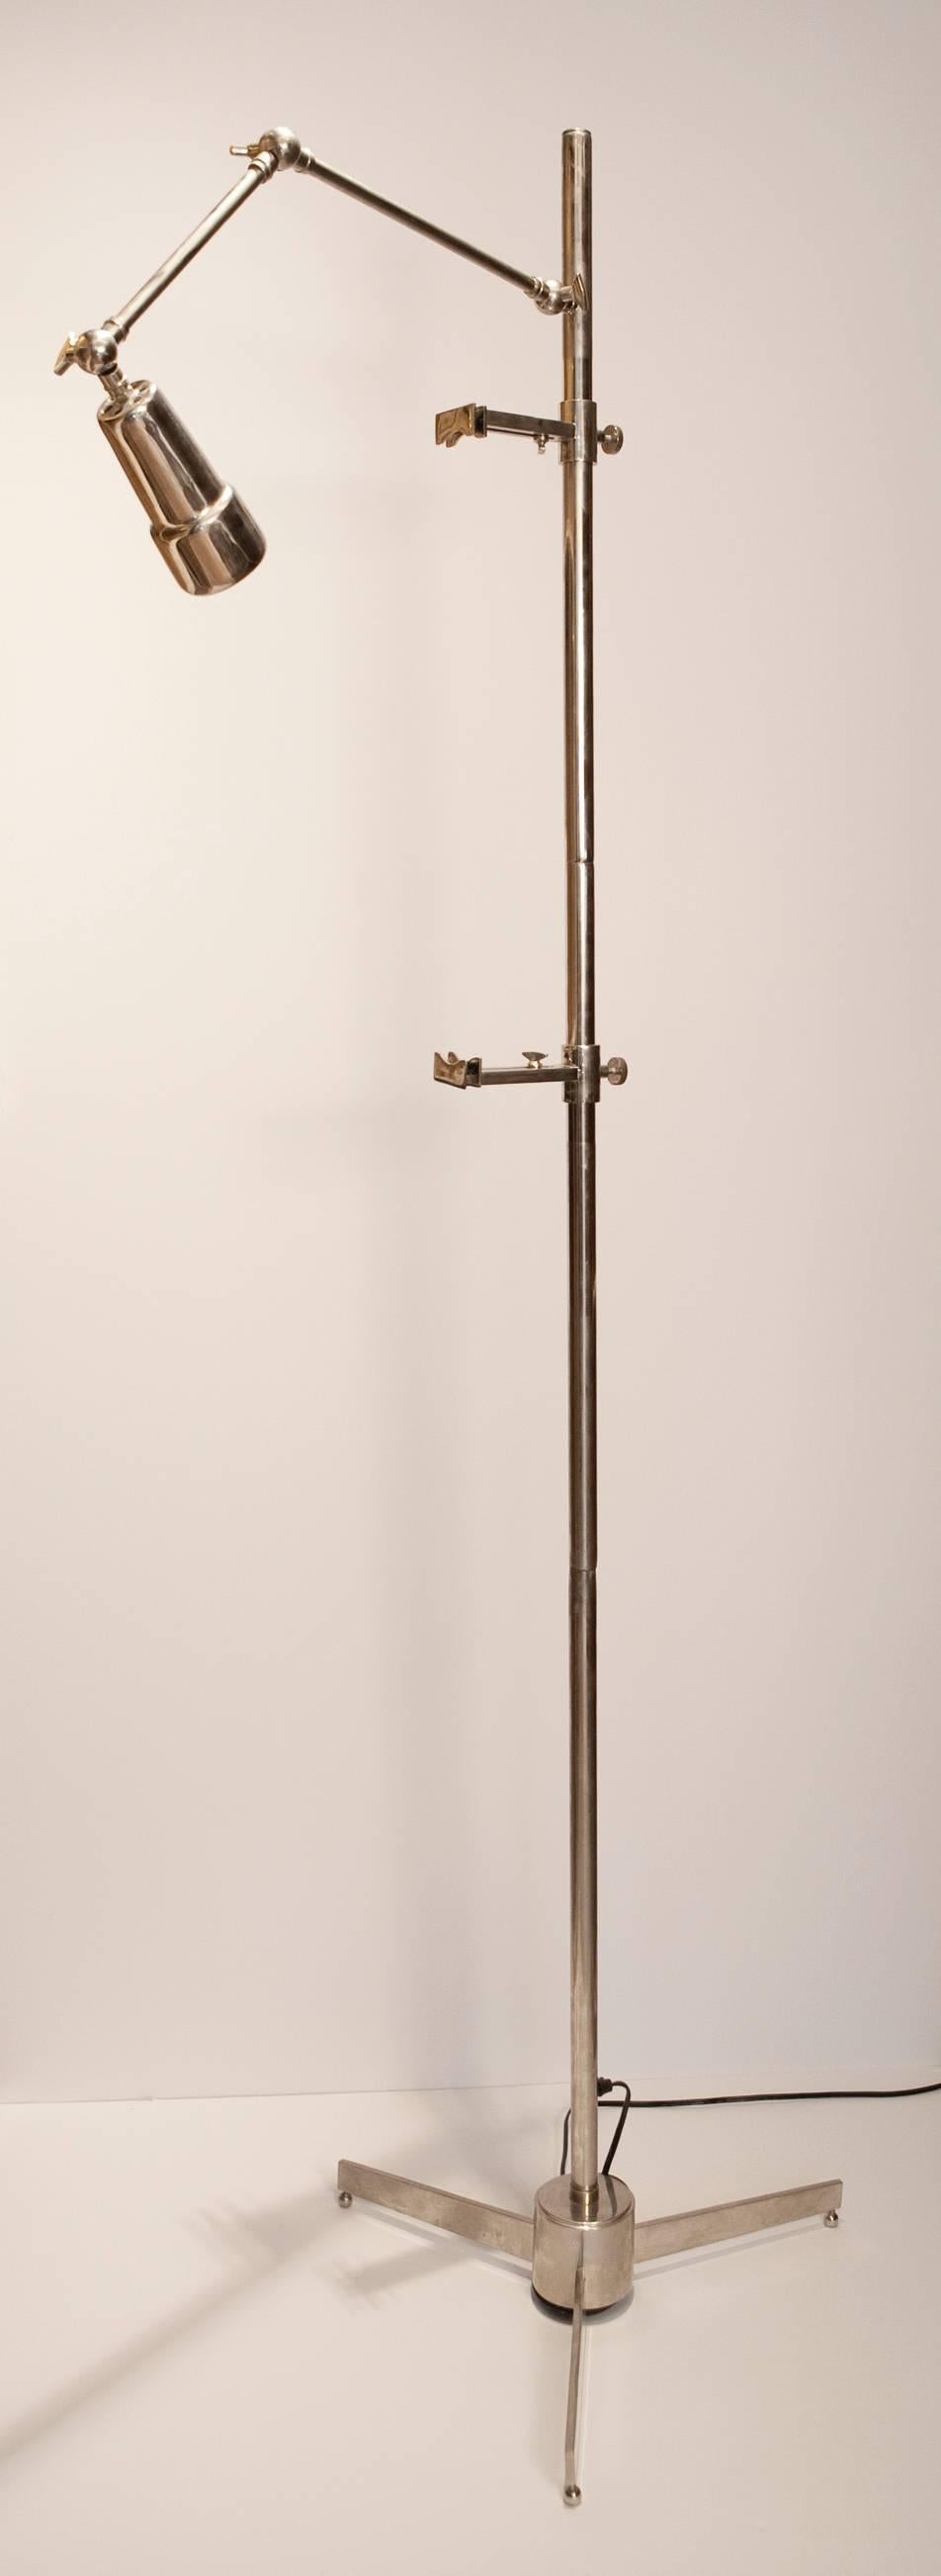 This floor easel lamp captures the spirit of Mid-Century Modern. This example is cast entirely in chrome, has adjustable top and bottom easel claw-hands to display most sizes of artwork.